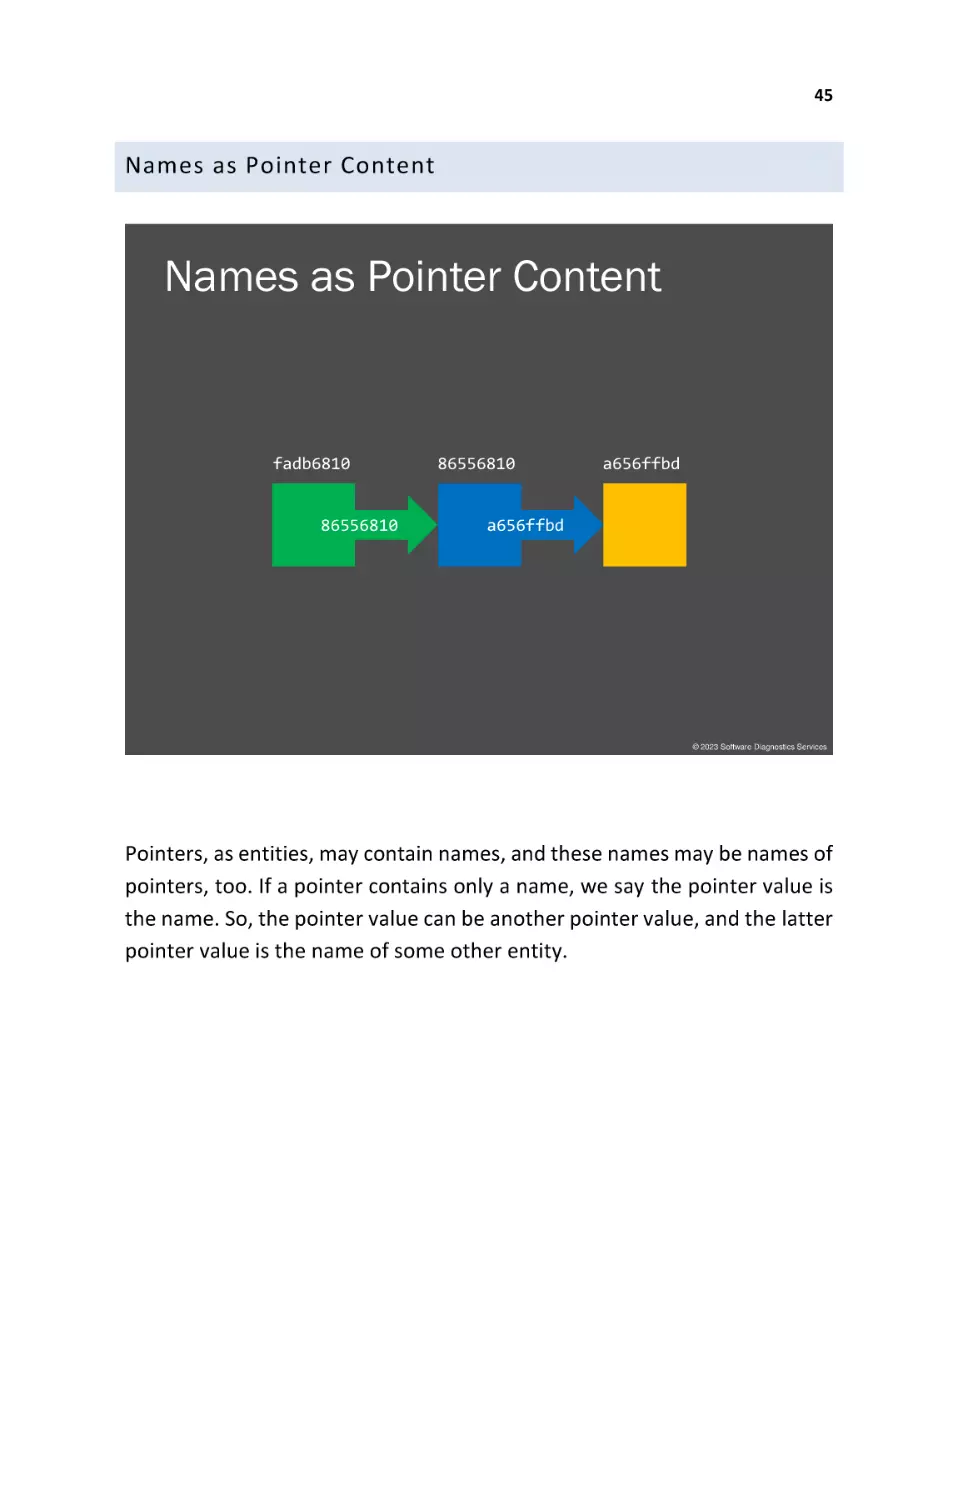 Names as Pointer Content